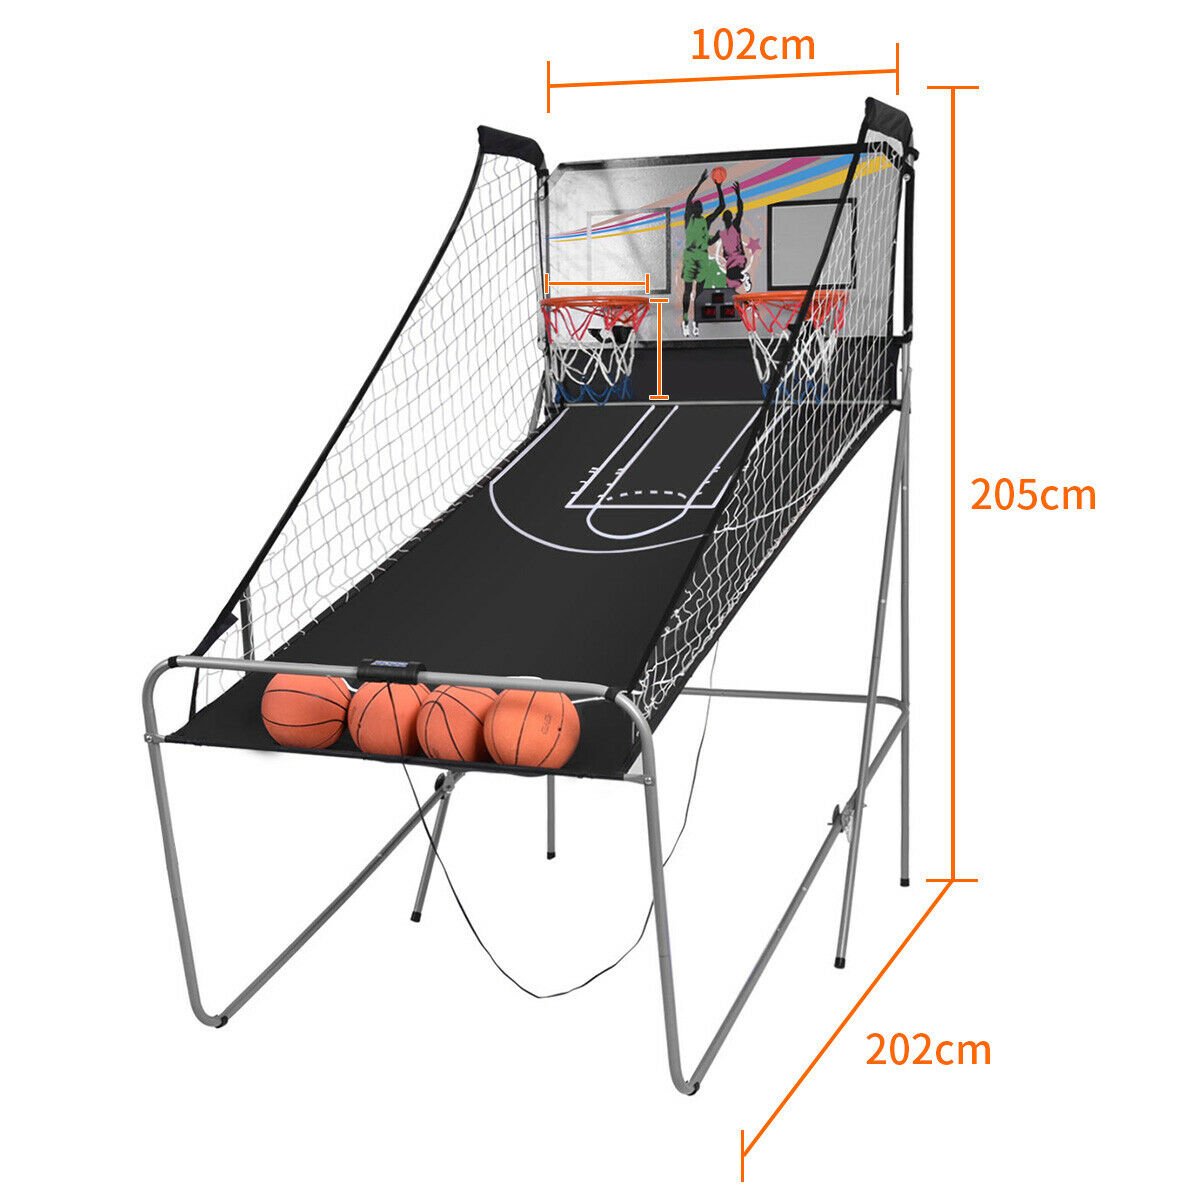 Experience Endless Fun with the 8-in-1 Basketball Hoop Game